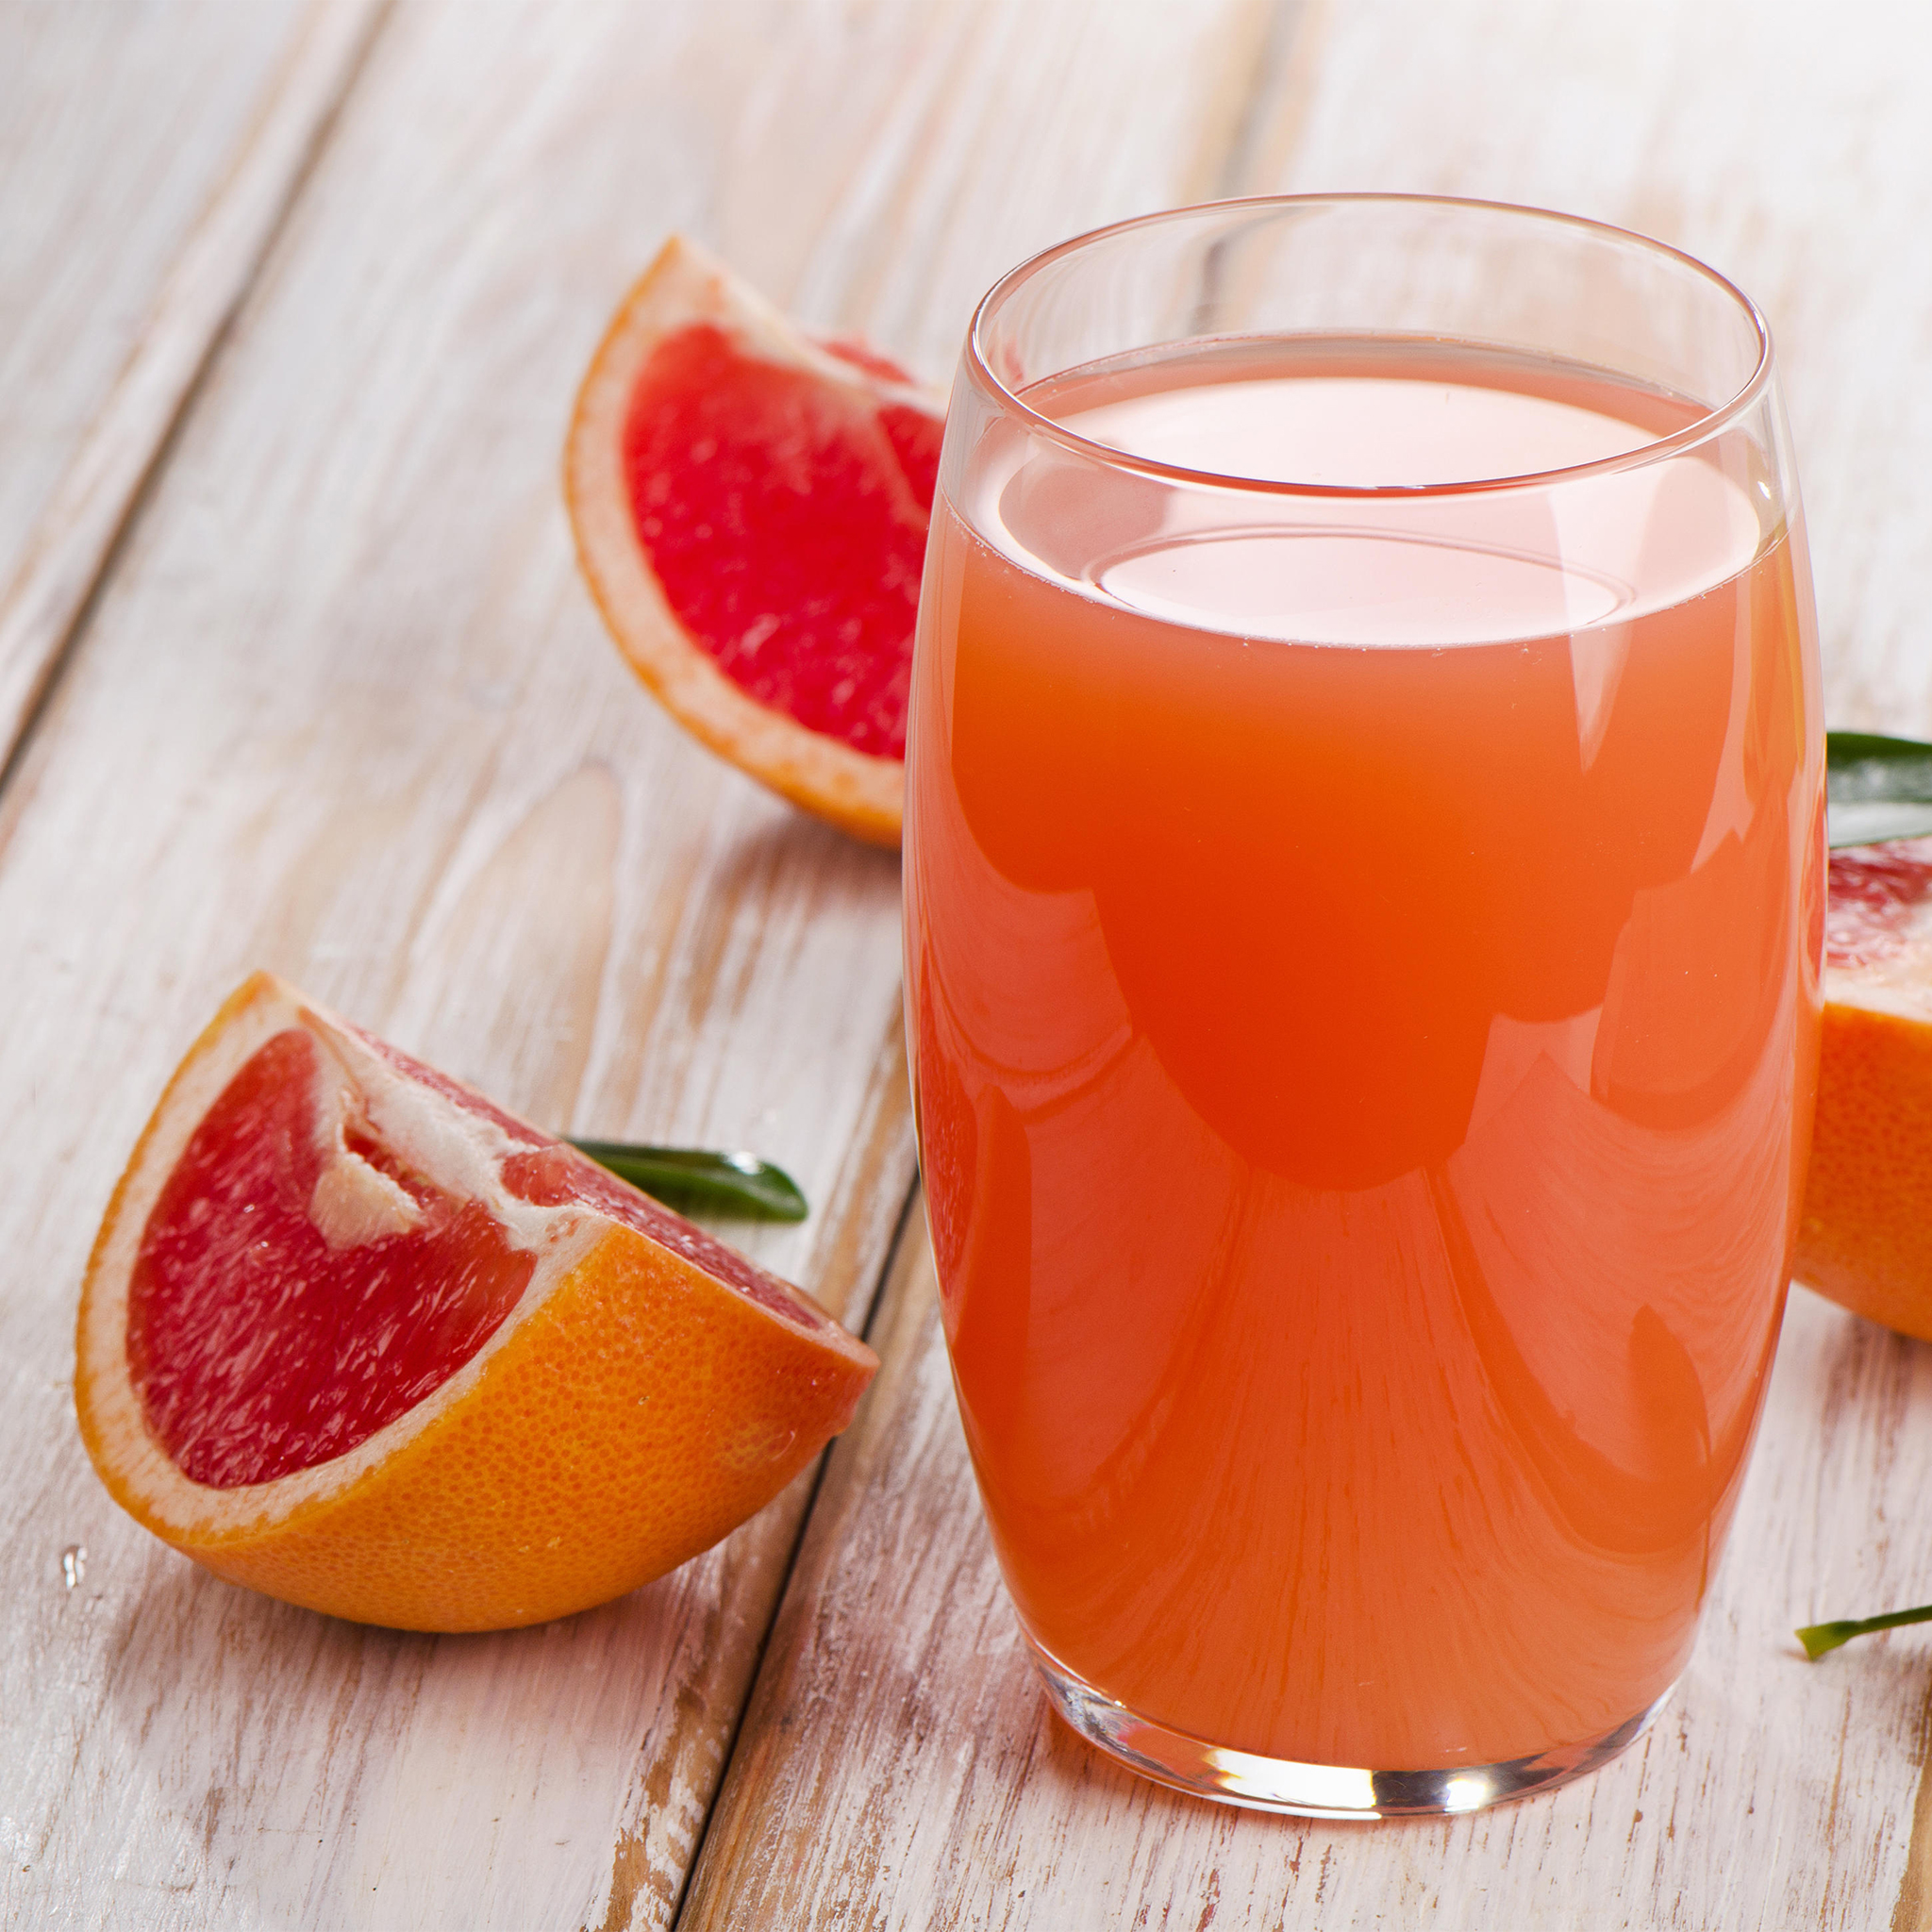 Grapefruit detox and Grapefruit juice are a healthy option to cleanse your body.